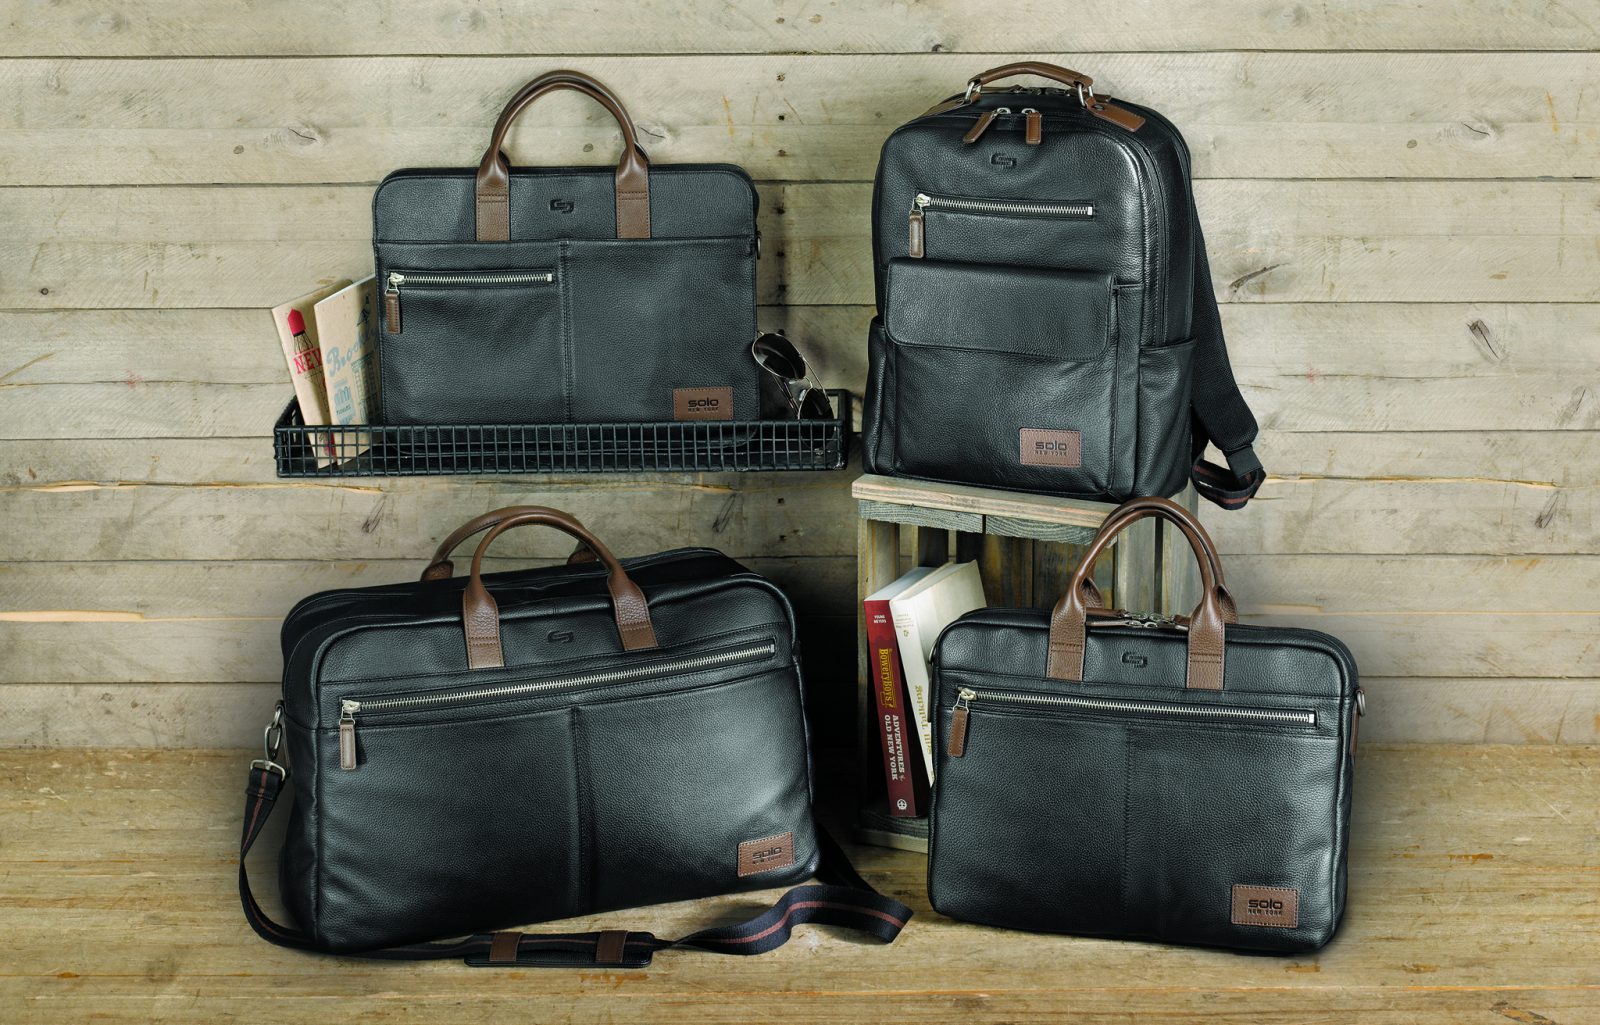 Solo New York - Roadster bag collection